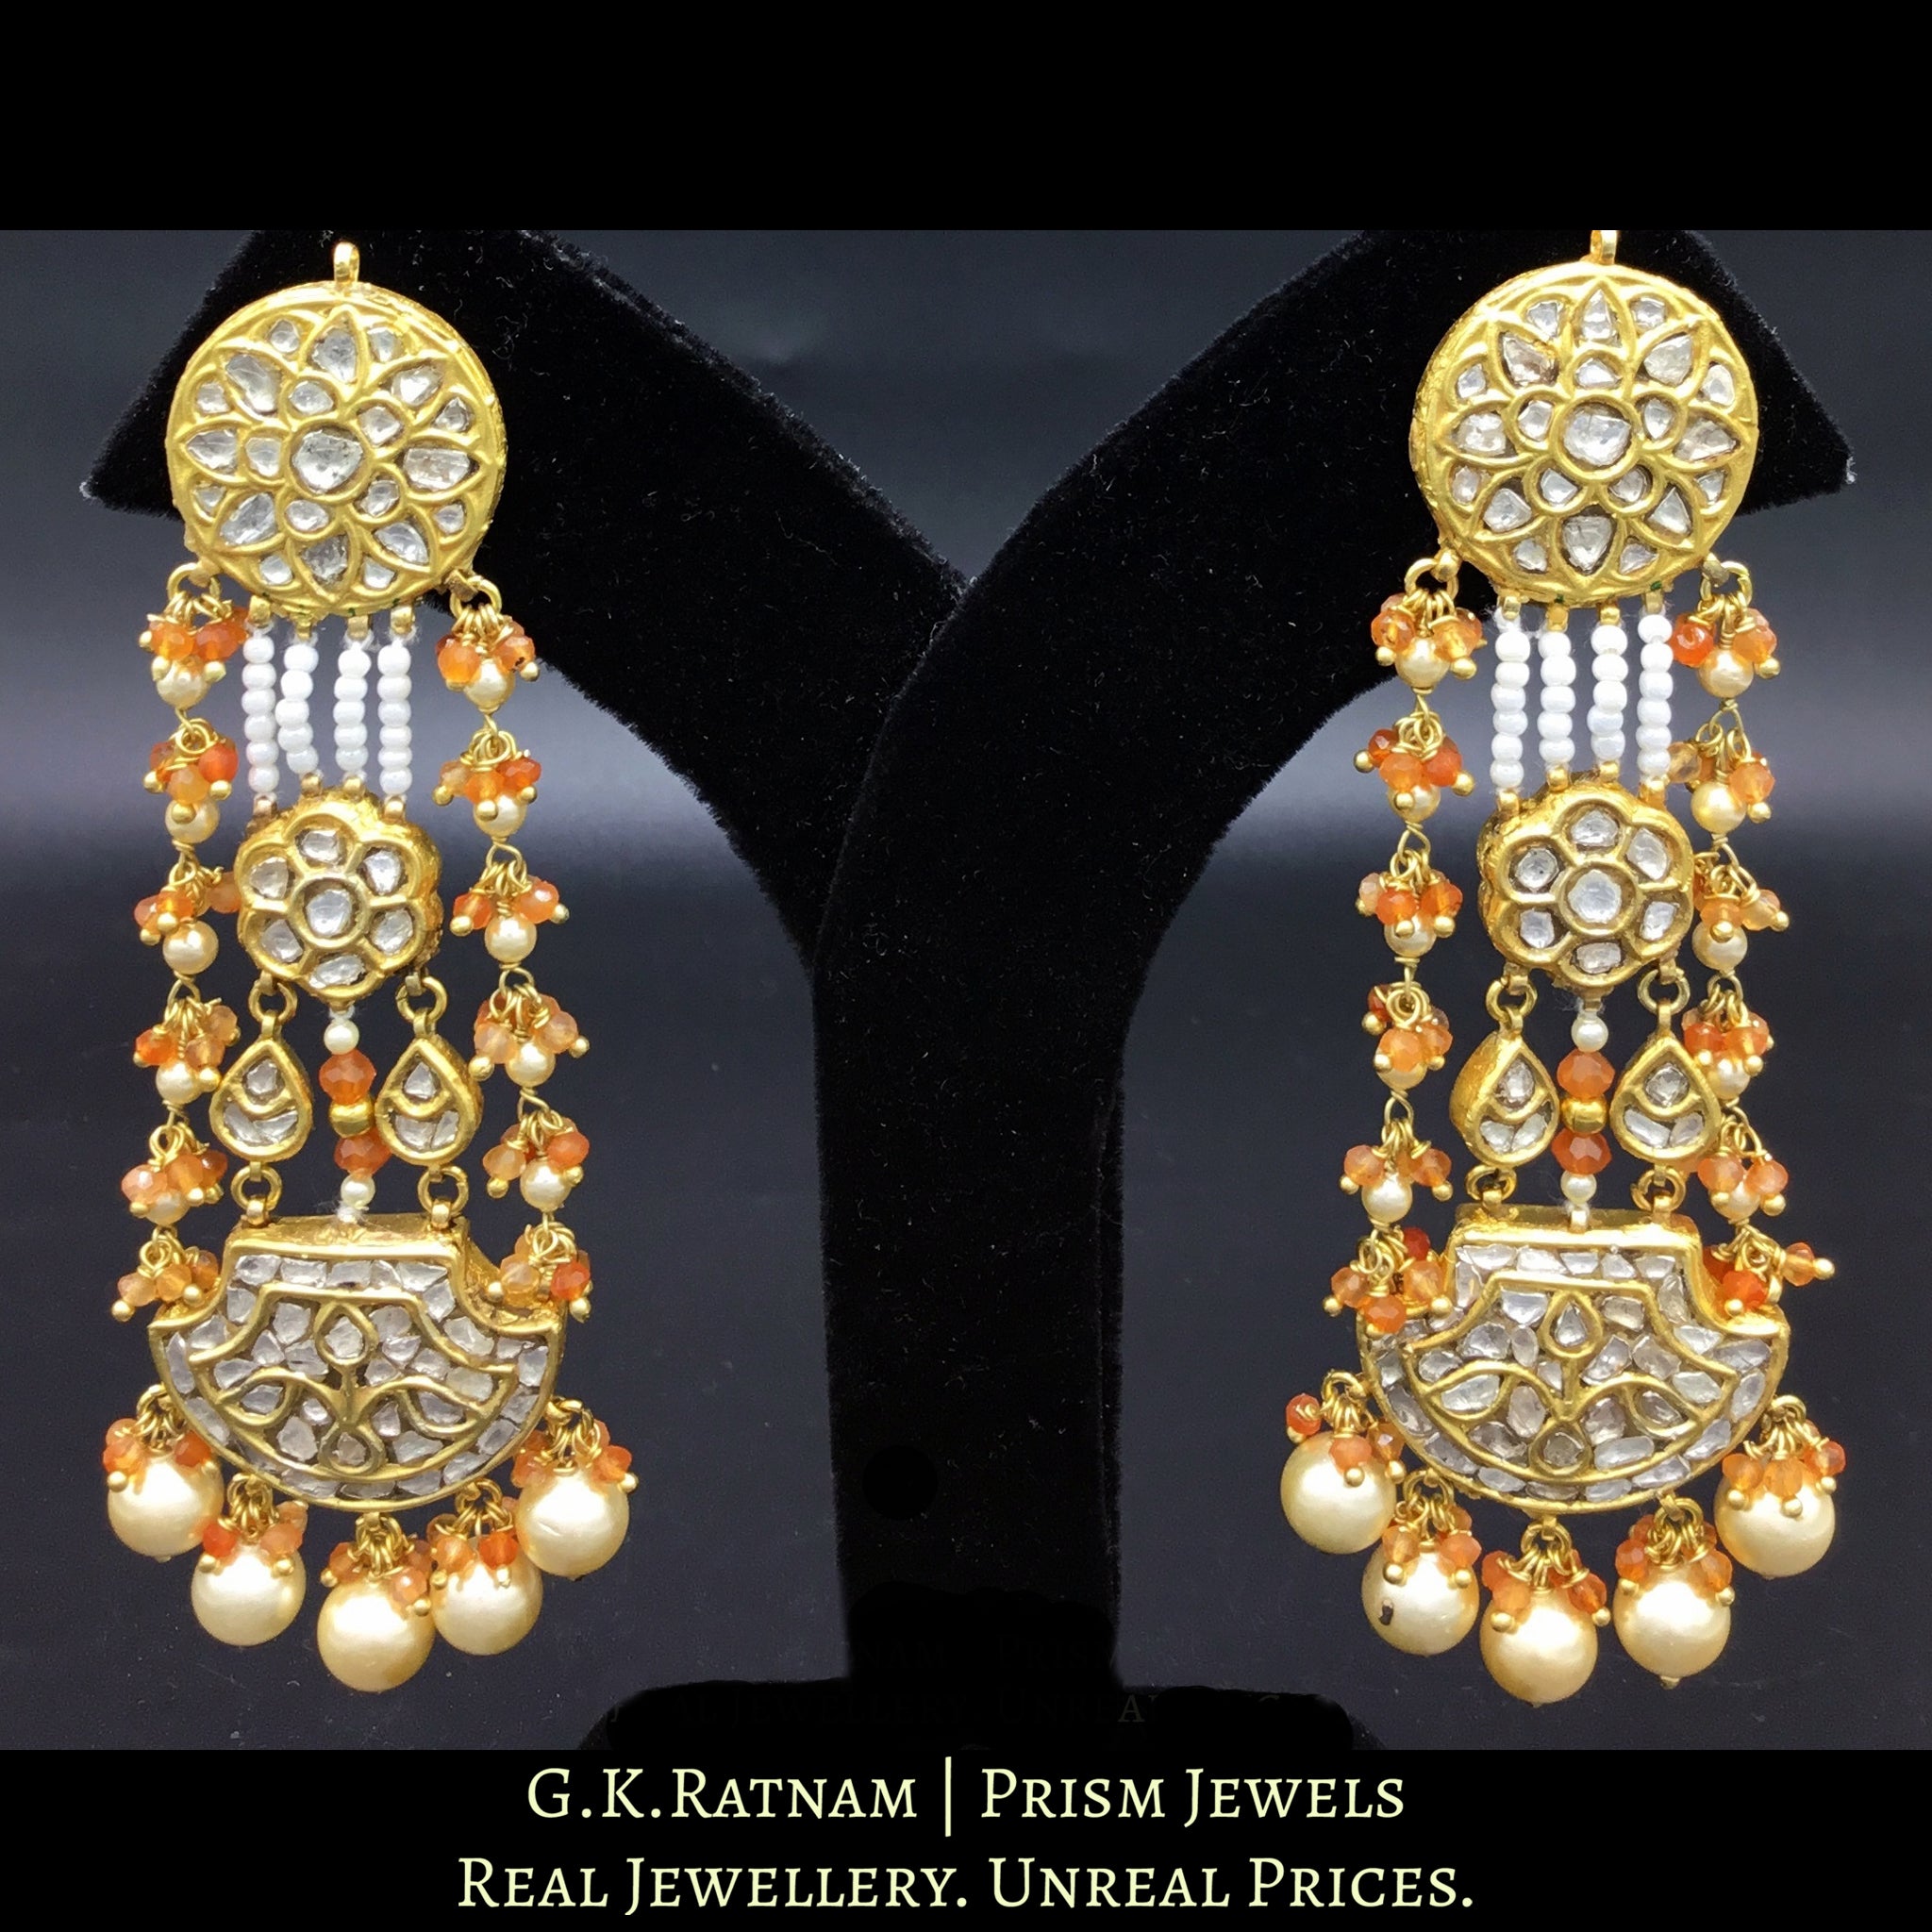 23k Gold and Diamond Polki pankhi (fan) Long Earring Pair with orange carnelians and natural freshwater pearls